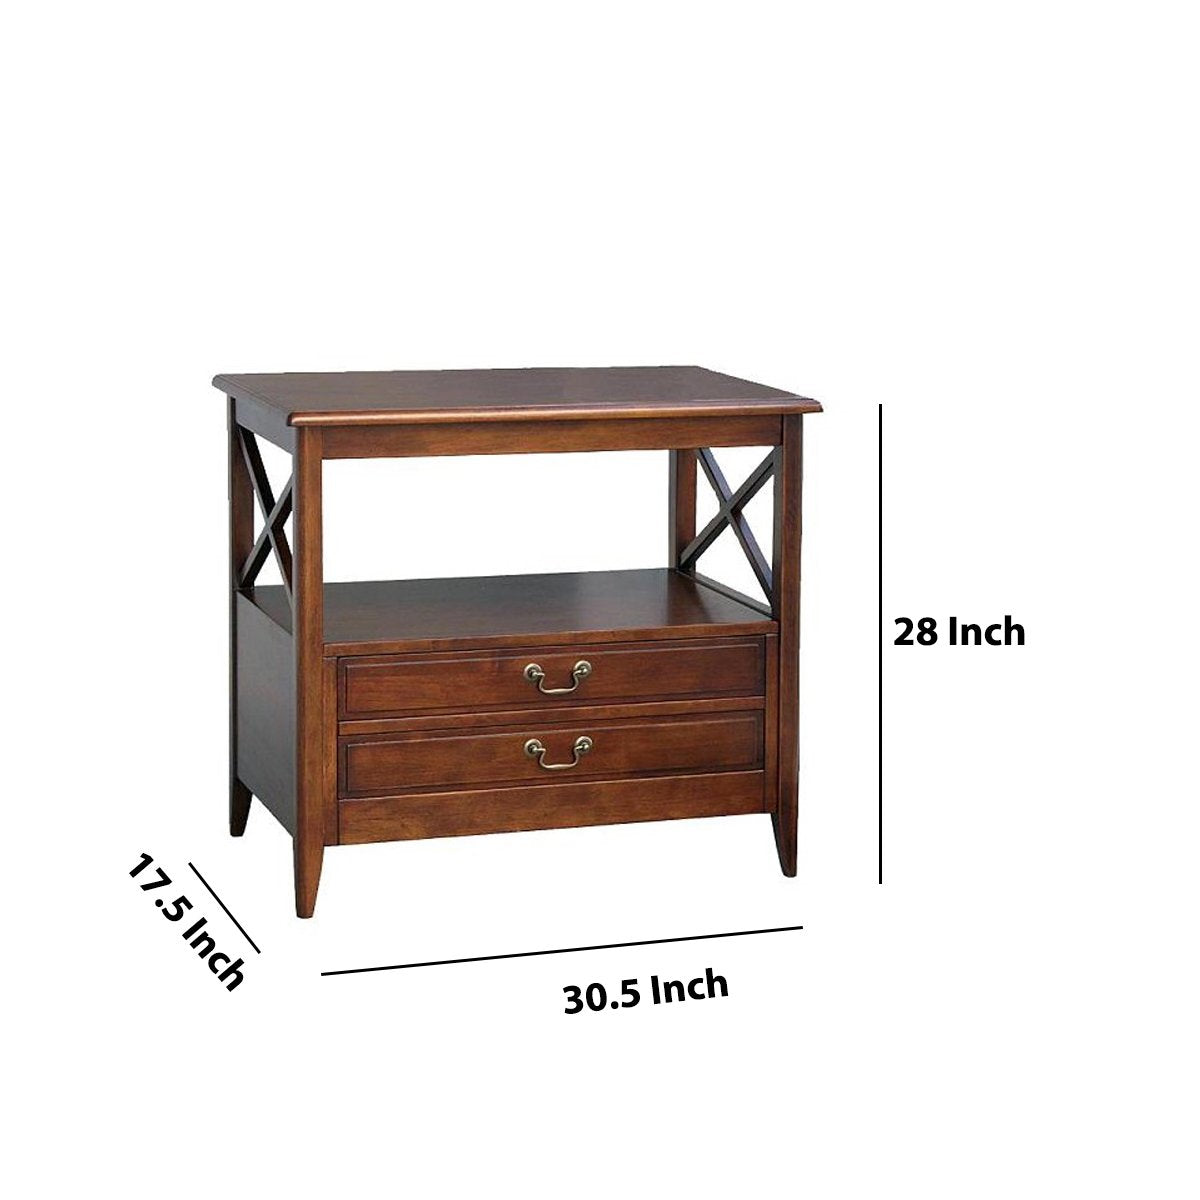 Wooden TV Stand with 2 Drawers and 1 Open Shelf, Dark Brown - BM210139